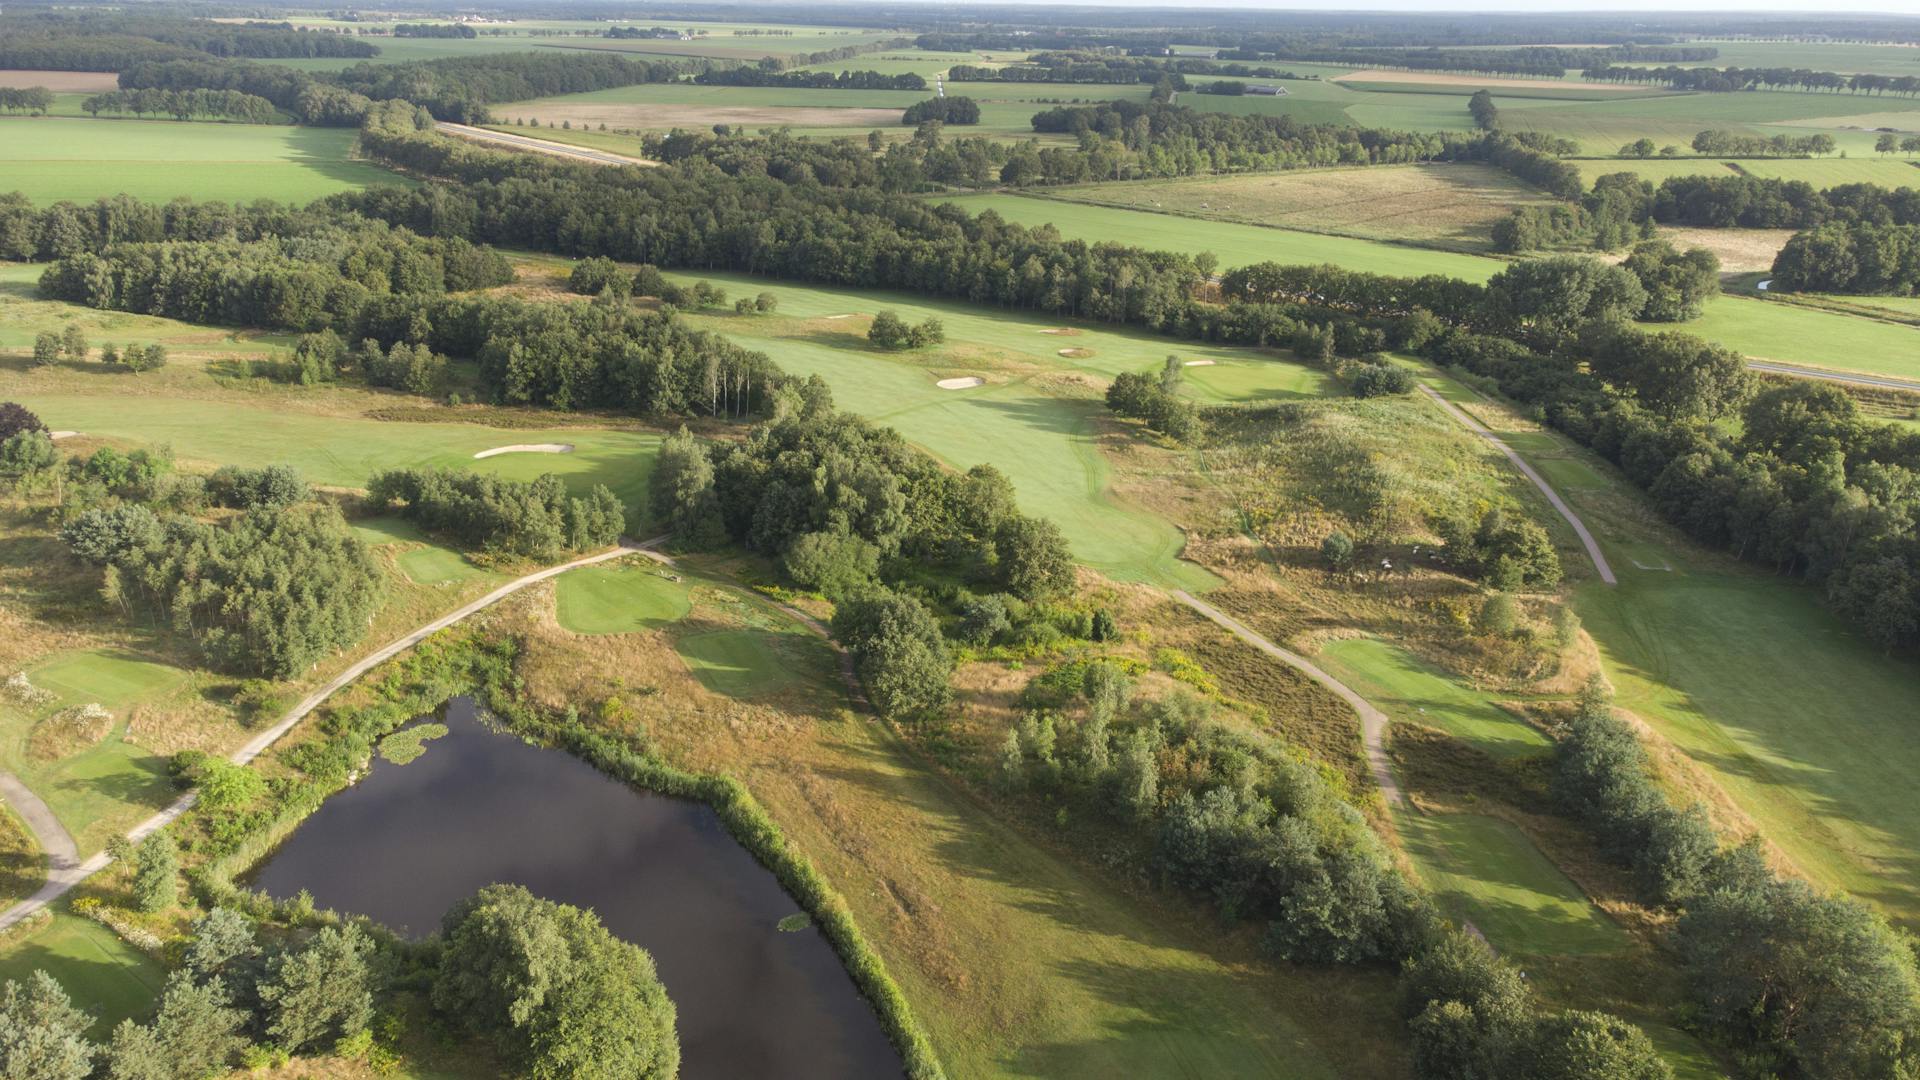 The courses covers more than 60 hectares. Source: Drentse Golfclub De Gelpenberg